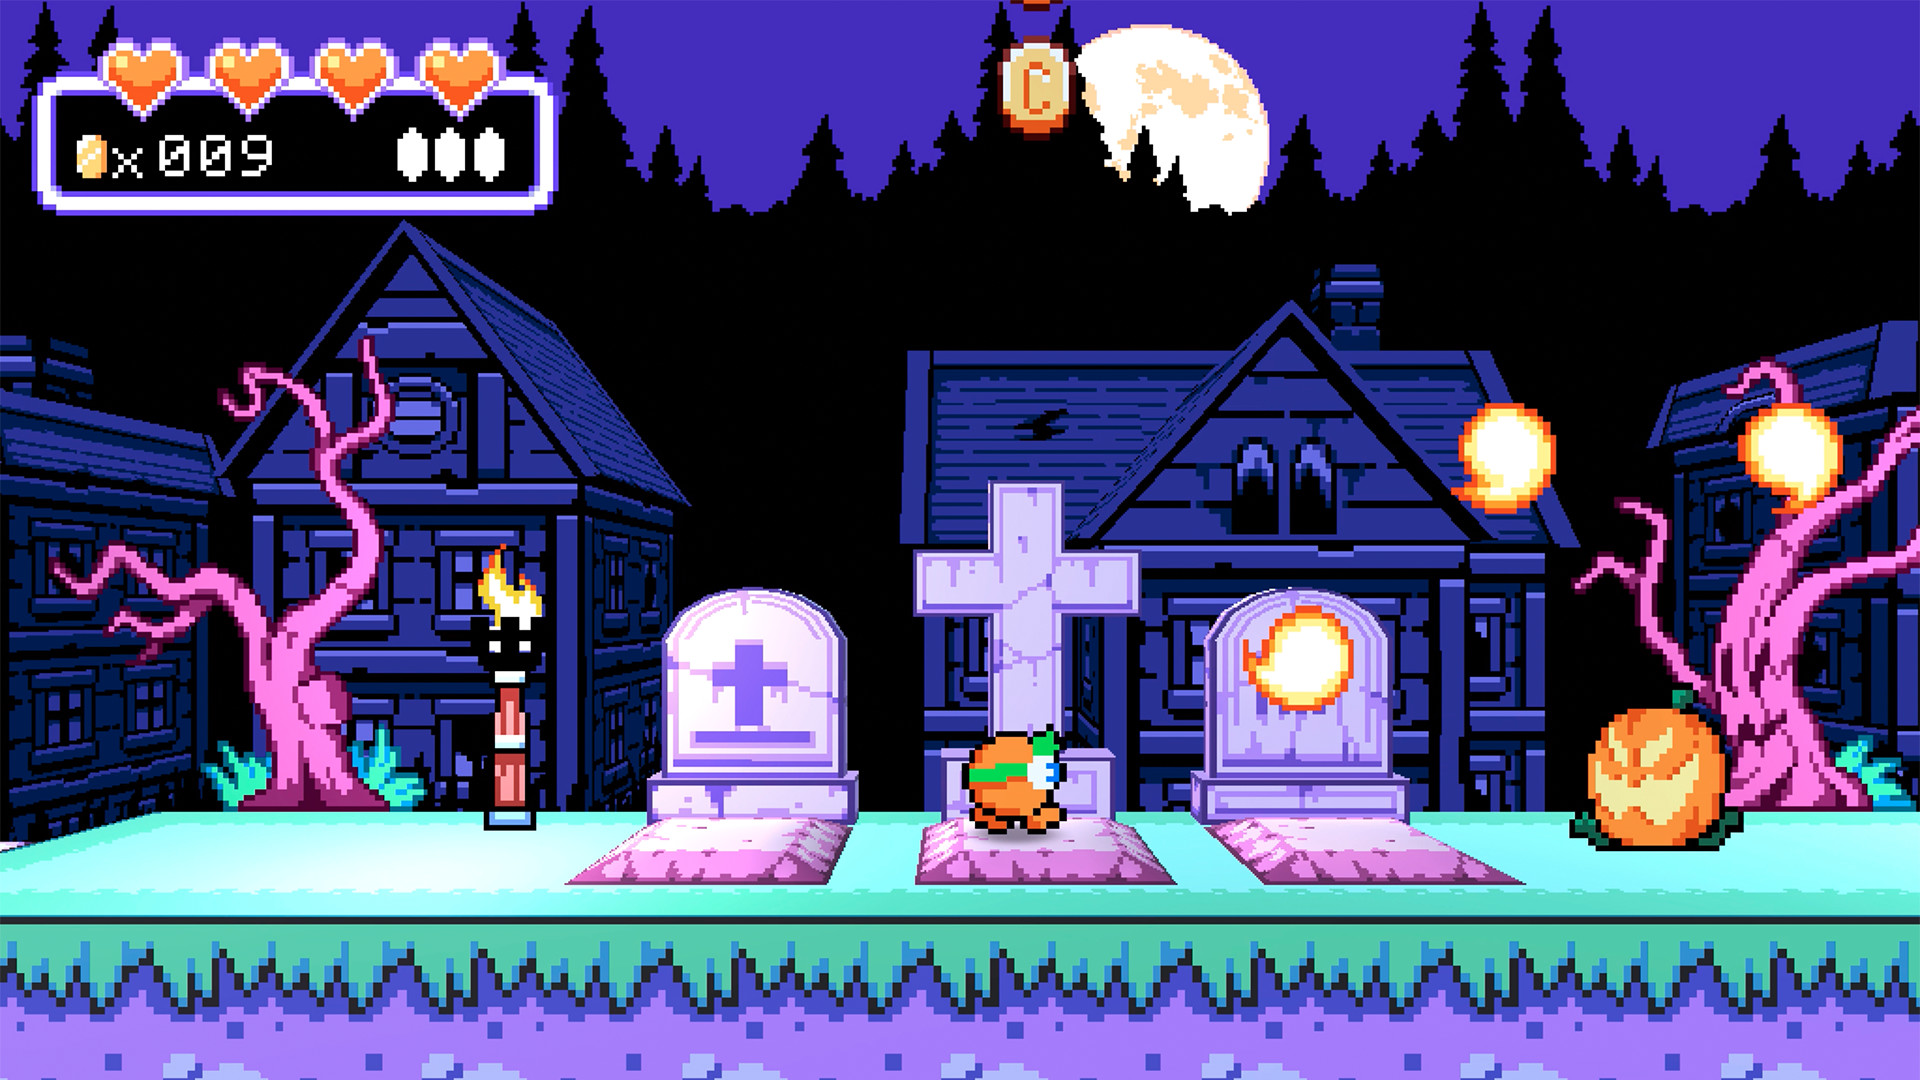 Rog moving to the right of the screen in a purplish, graveyard-themed level